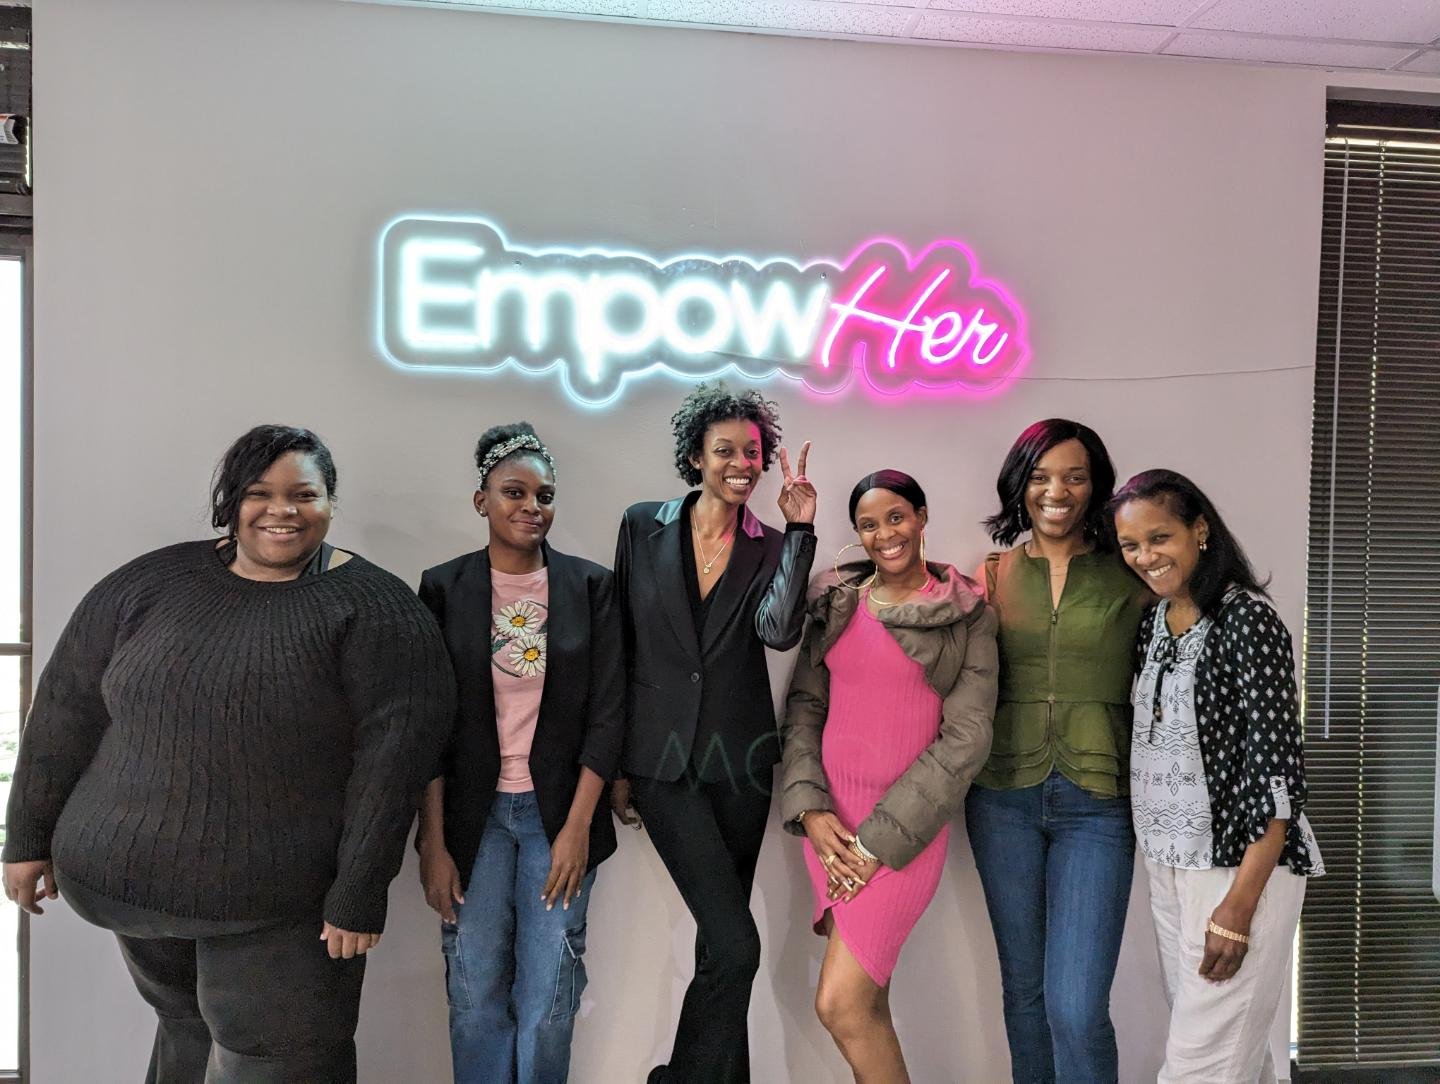 Our first official Alumni workshop was a success! Huge thank you to @dressforsuccessatlanta for hosting us and a few of our wonderful moms, and thank you to Lauren for the amazing session! Our moms left feeling inspired, motivated and ready to take o